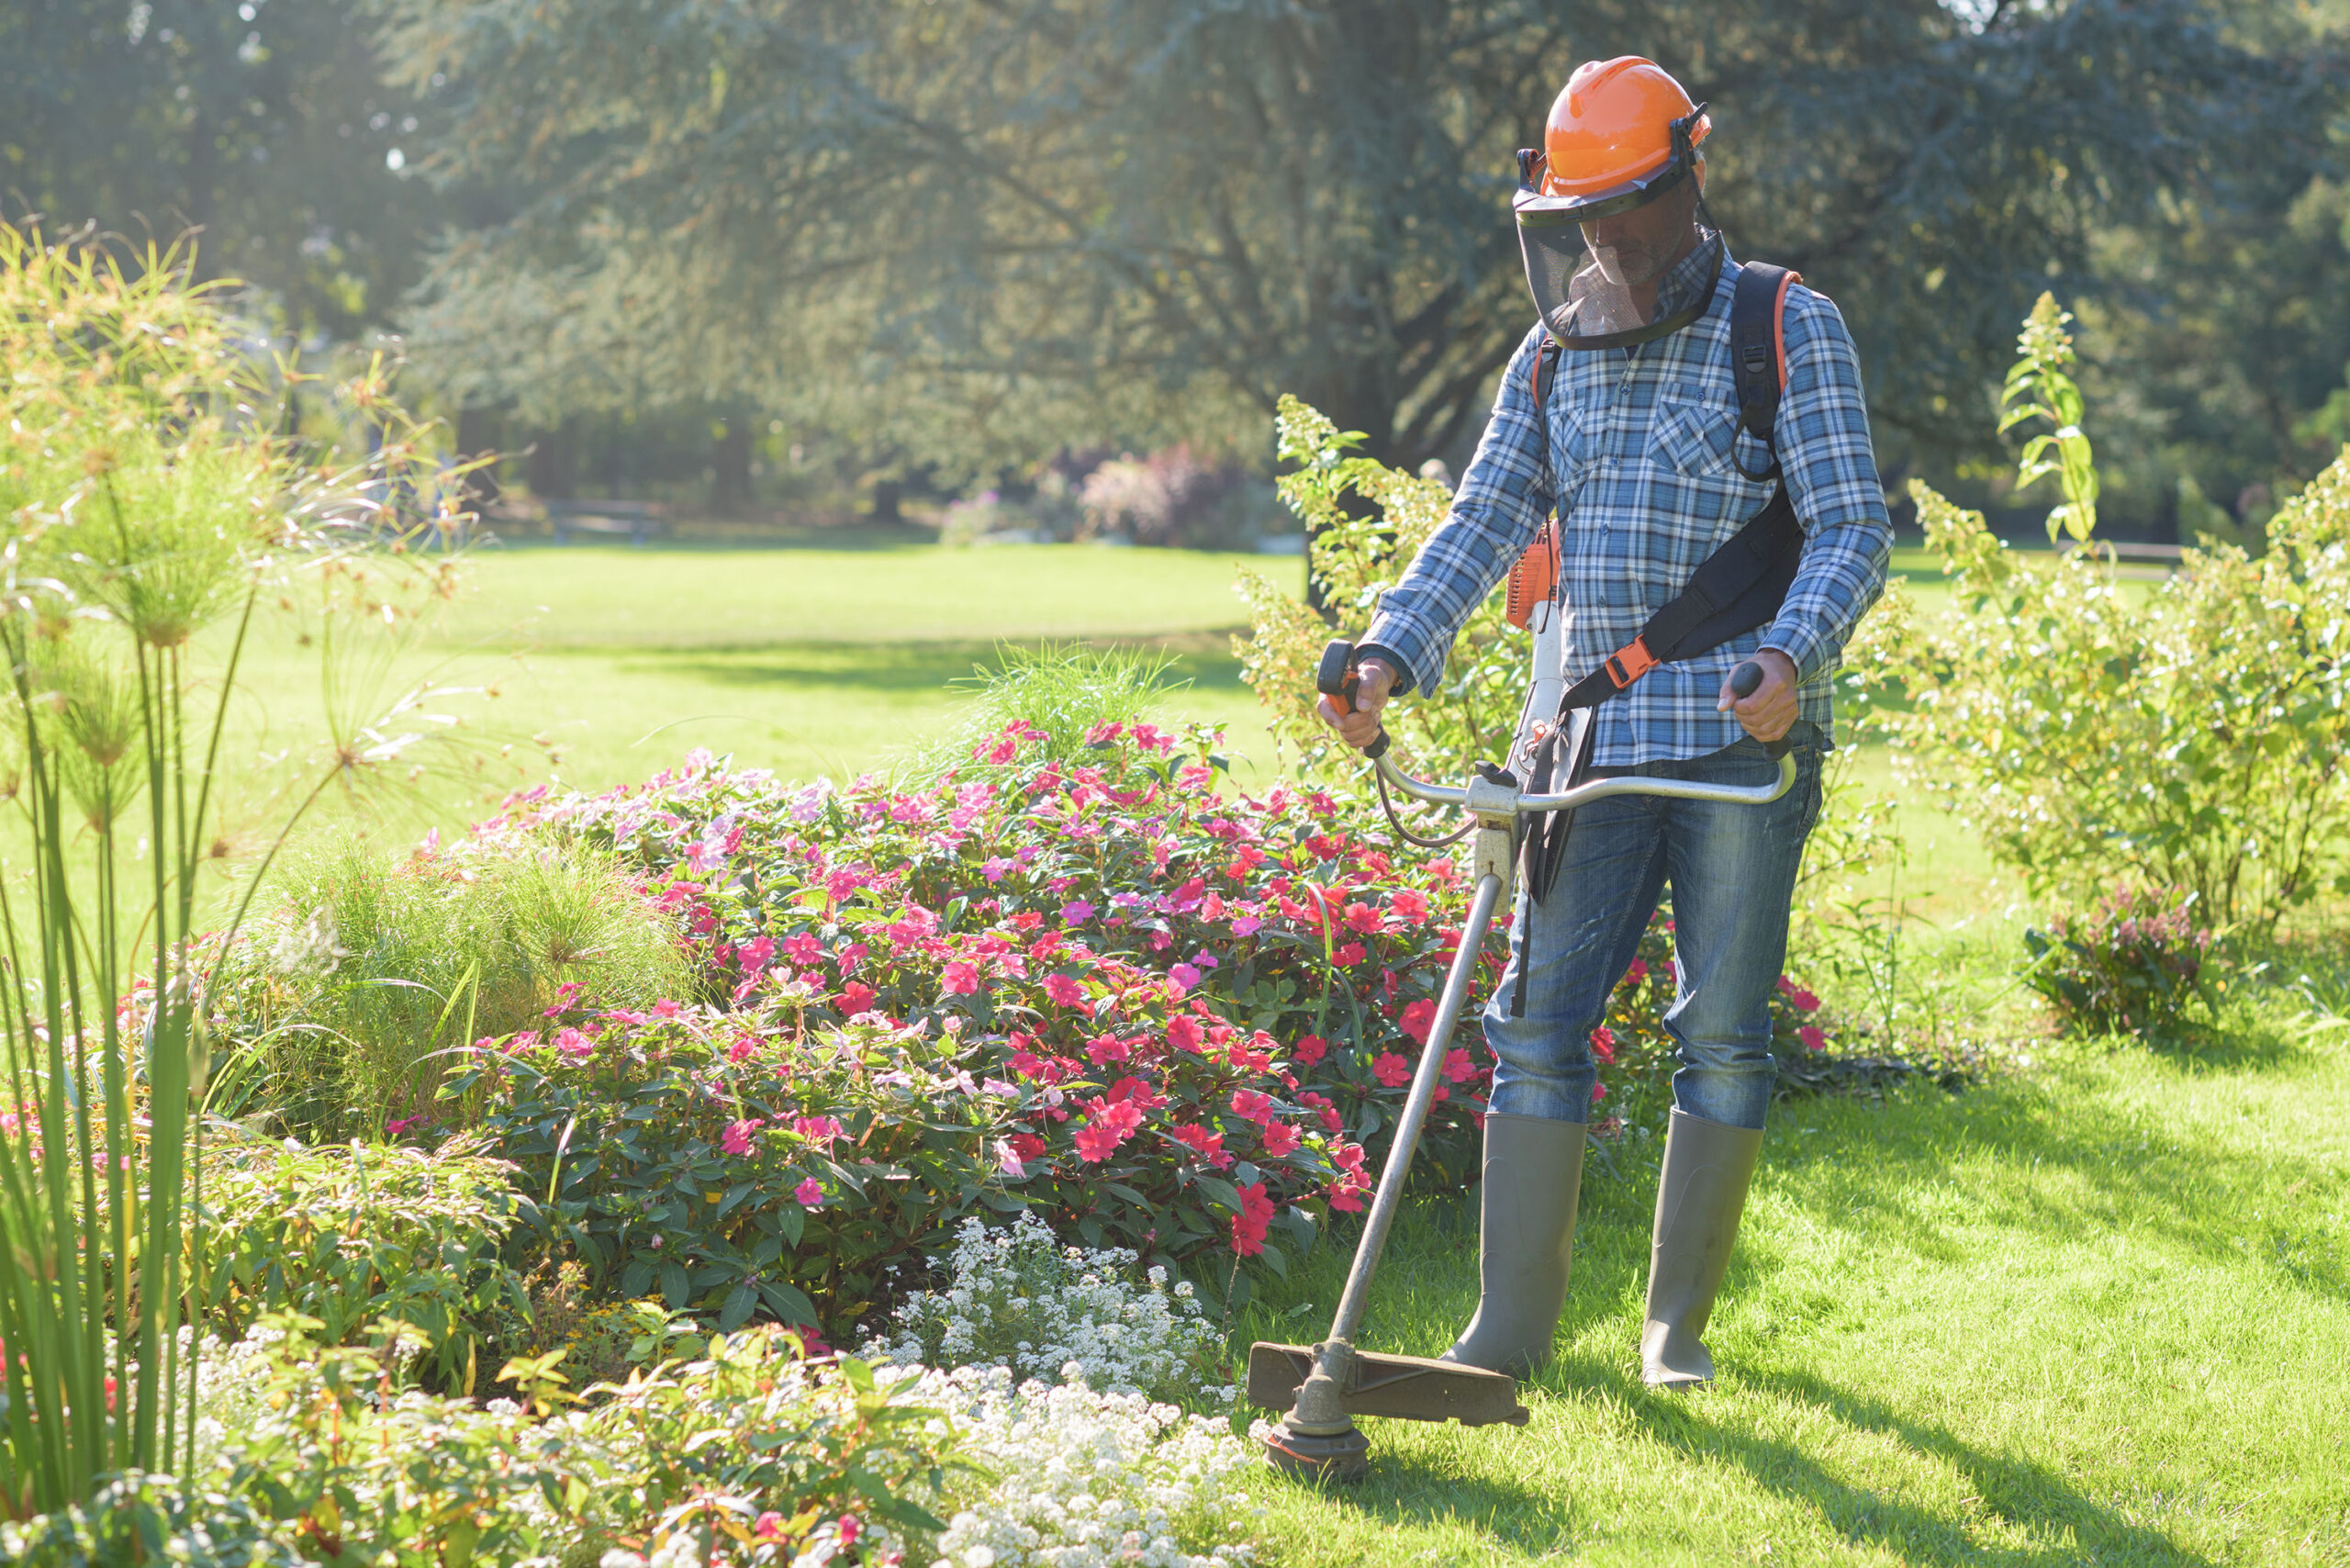 Man doing landscaping. Weed Out Risk This Spring with General Liability Insurance, Branch Out for Lawn Care and Landscaping Risks